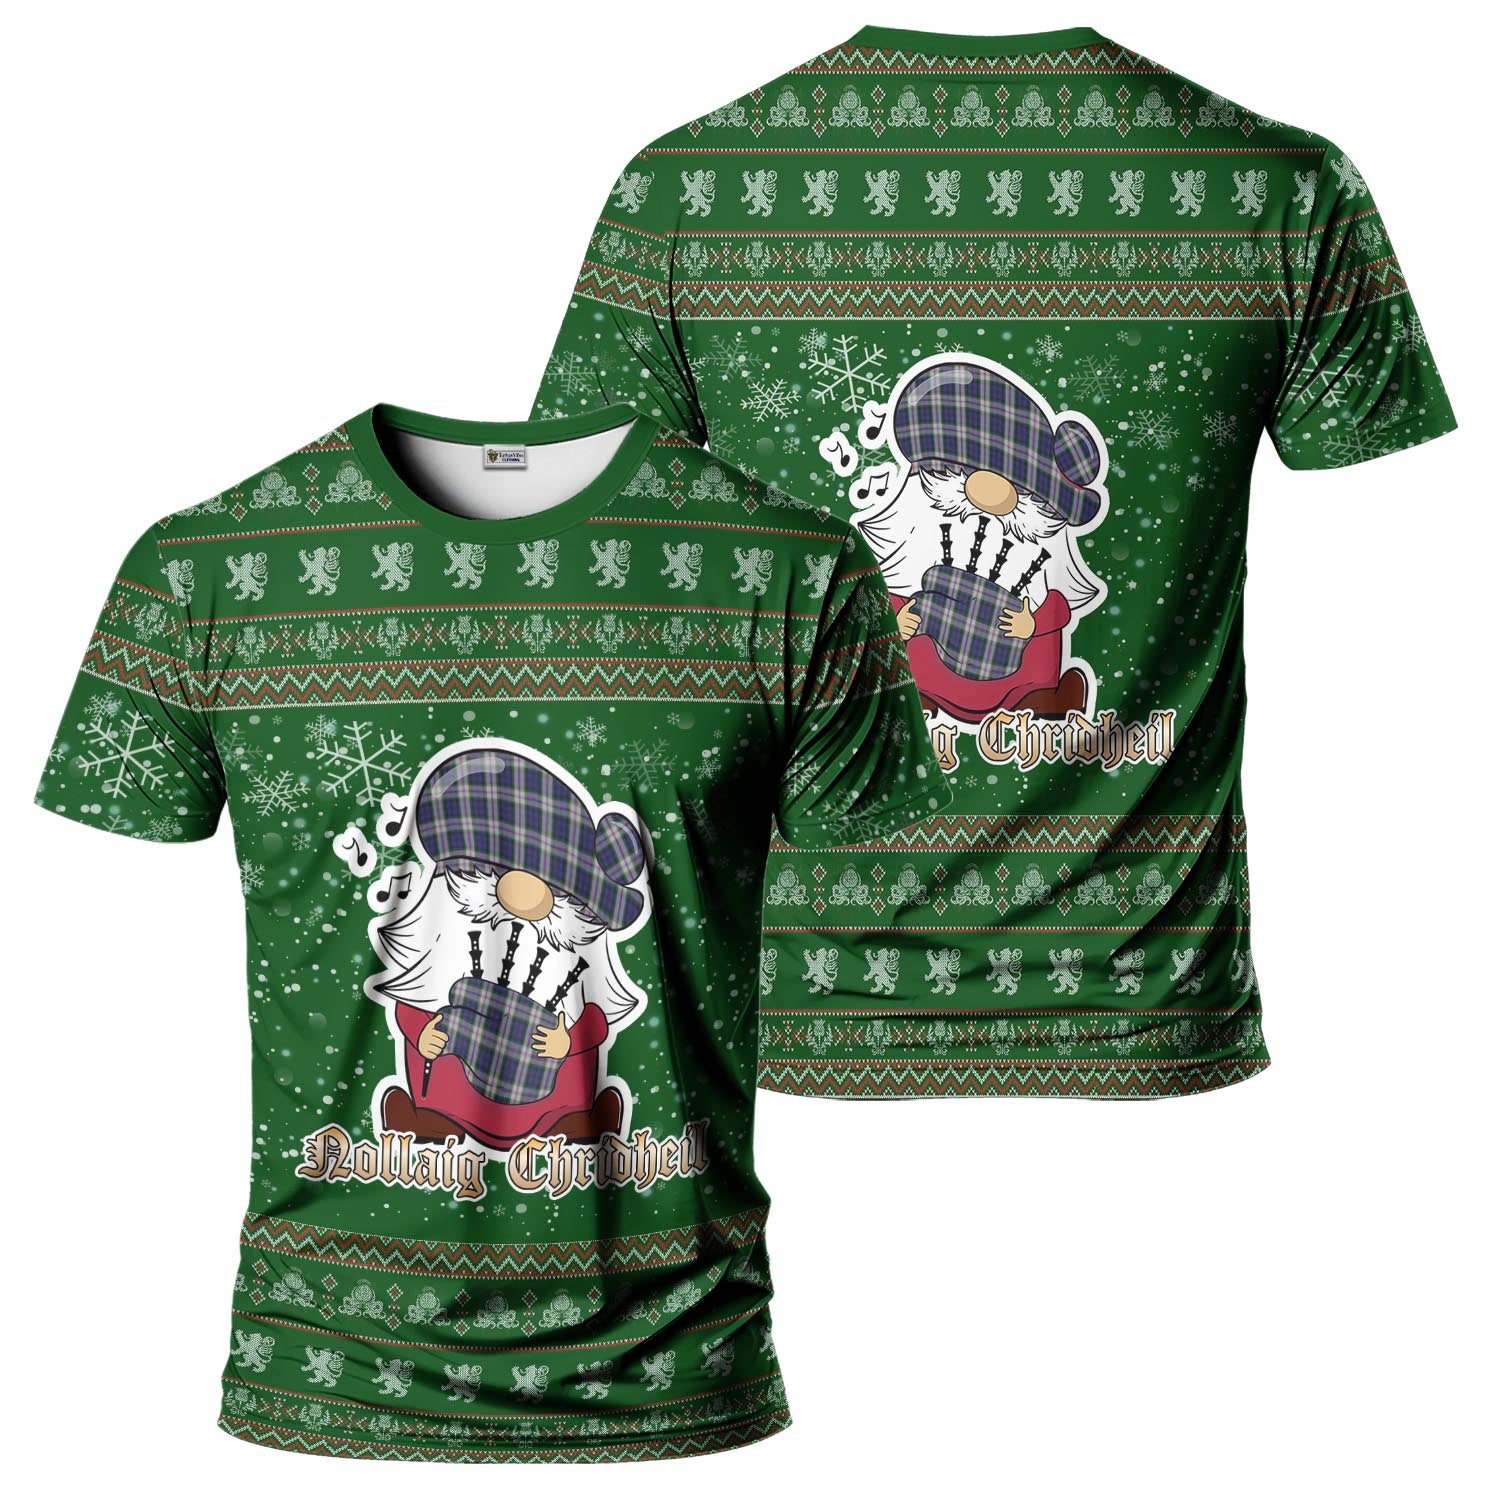 Baird Dress Clan Christmas Family T-Shirt with Funny Gnome Playing Bagpipes Men's Shirt Green - Tartanvibesclothing